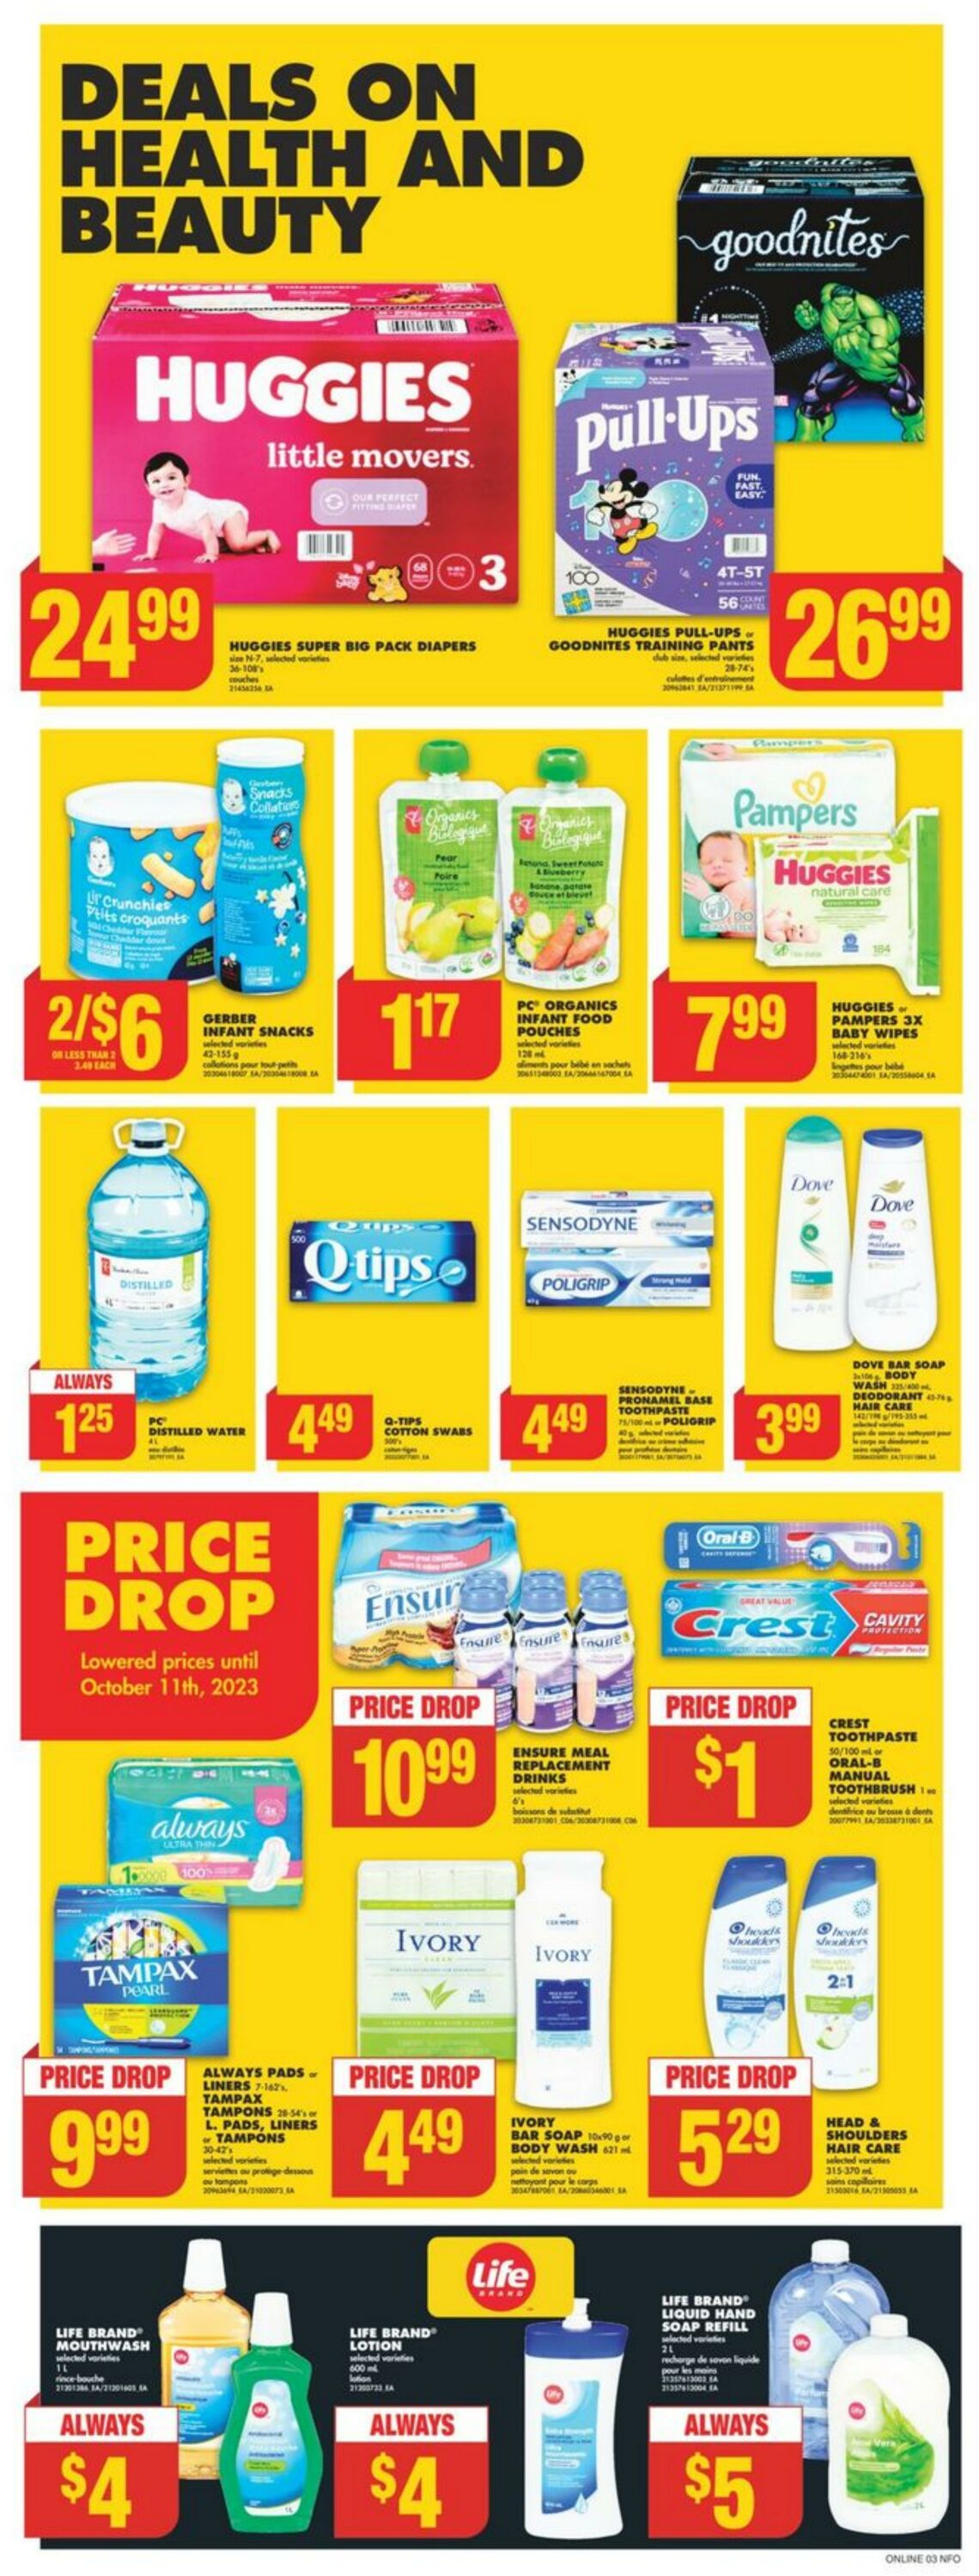 No Frills Flyer from 09/14/2023